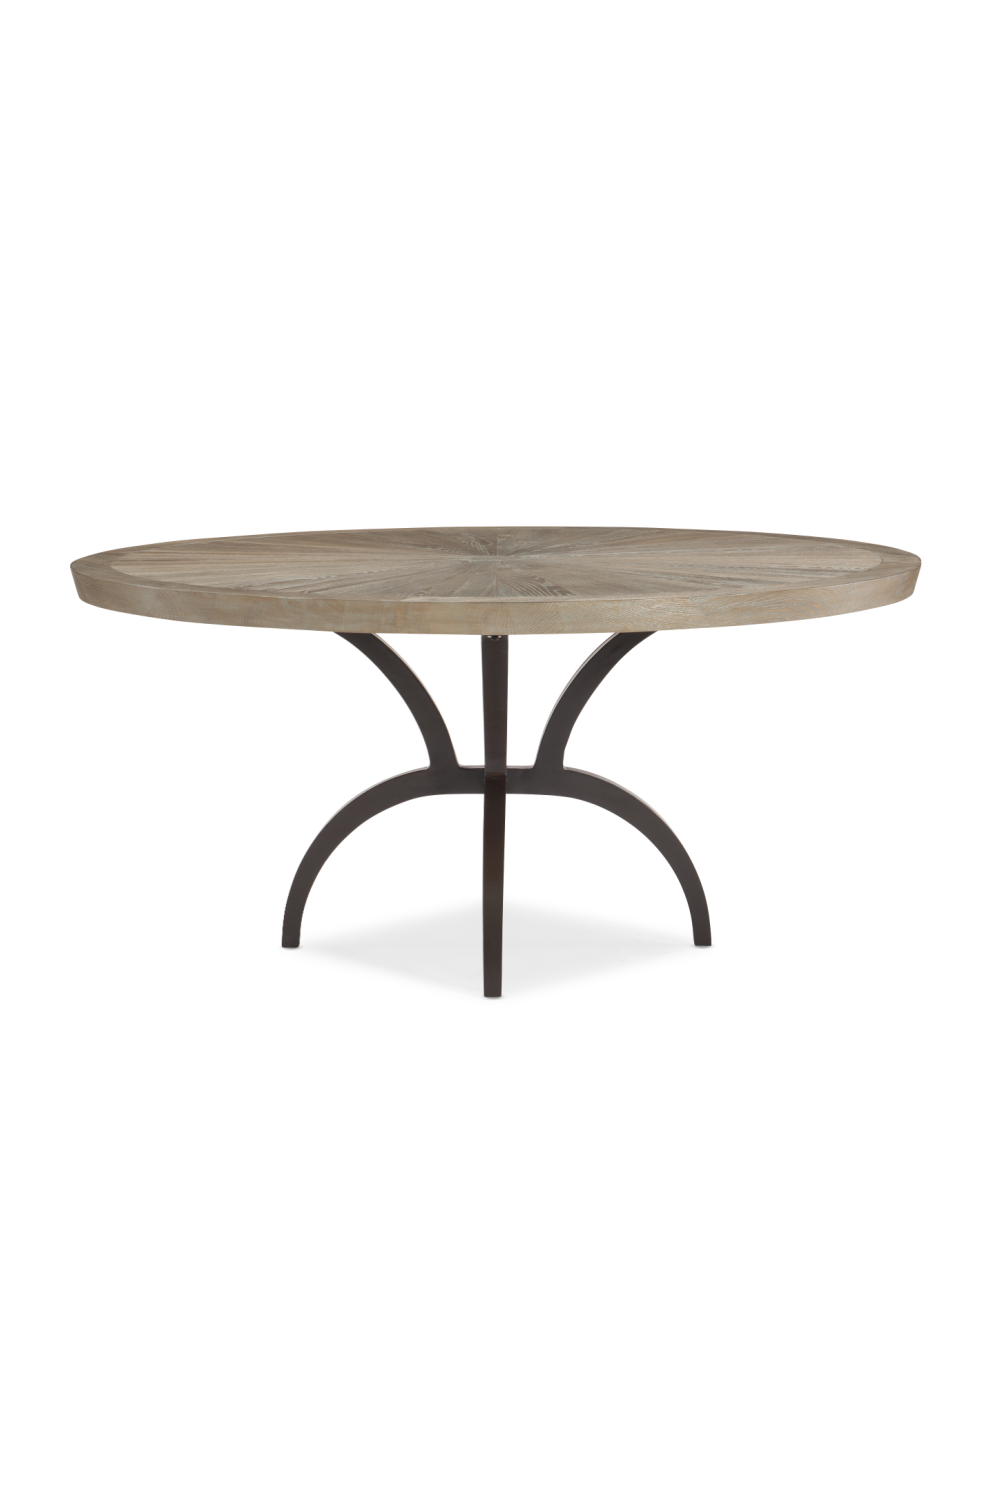 Round Ash Dining Table | Caracole Rough And Ready 54 | Wood Furniture